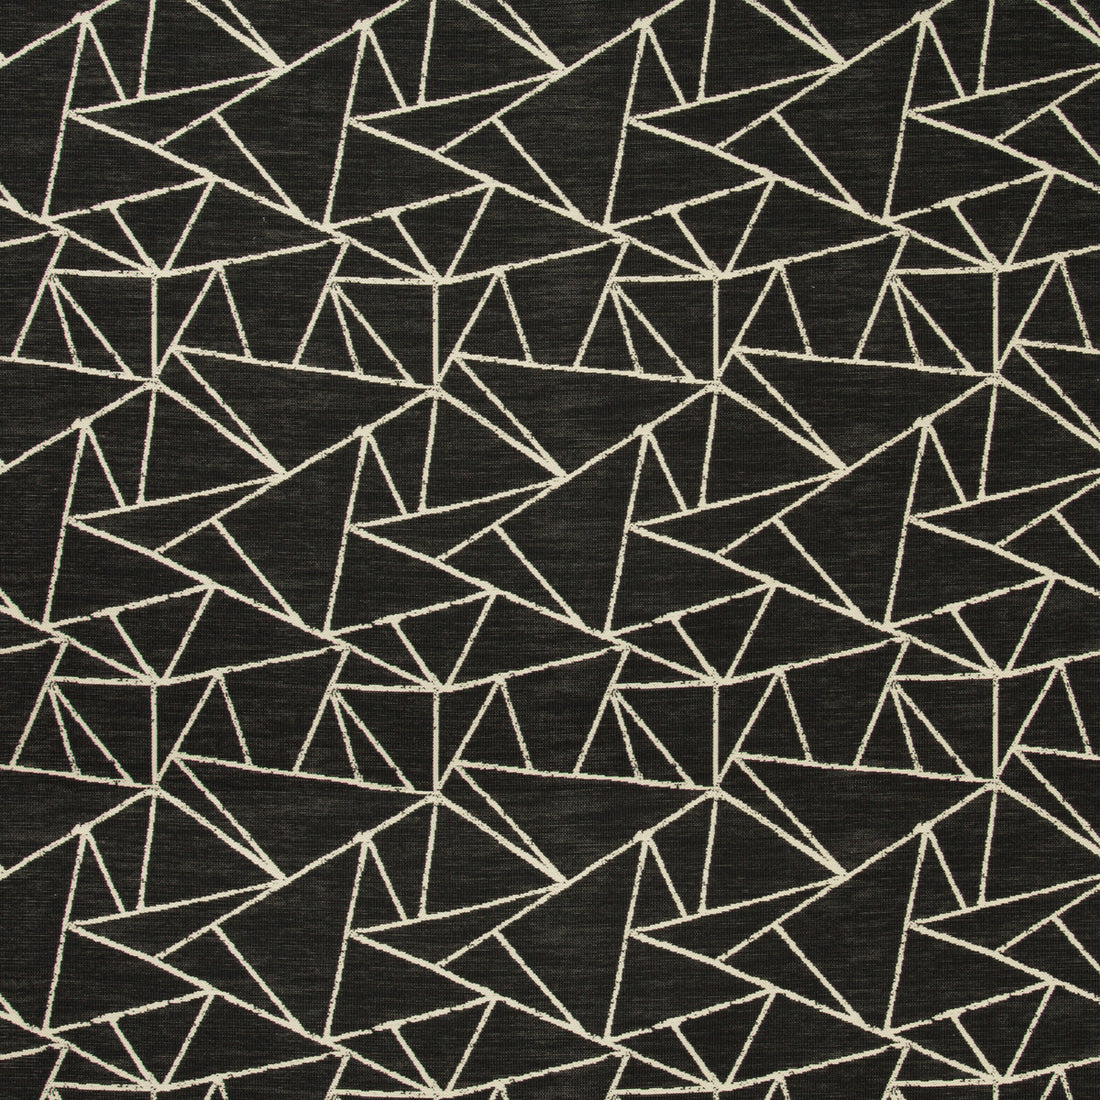 Kravet Contract fabric in 35019-8 color - pattern 35019.8.0 - by Kravet Contract in the Incase Crypton Gis collection